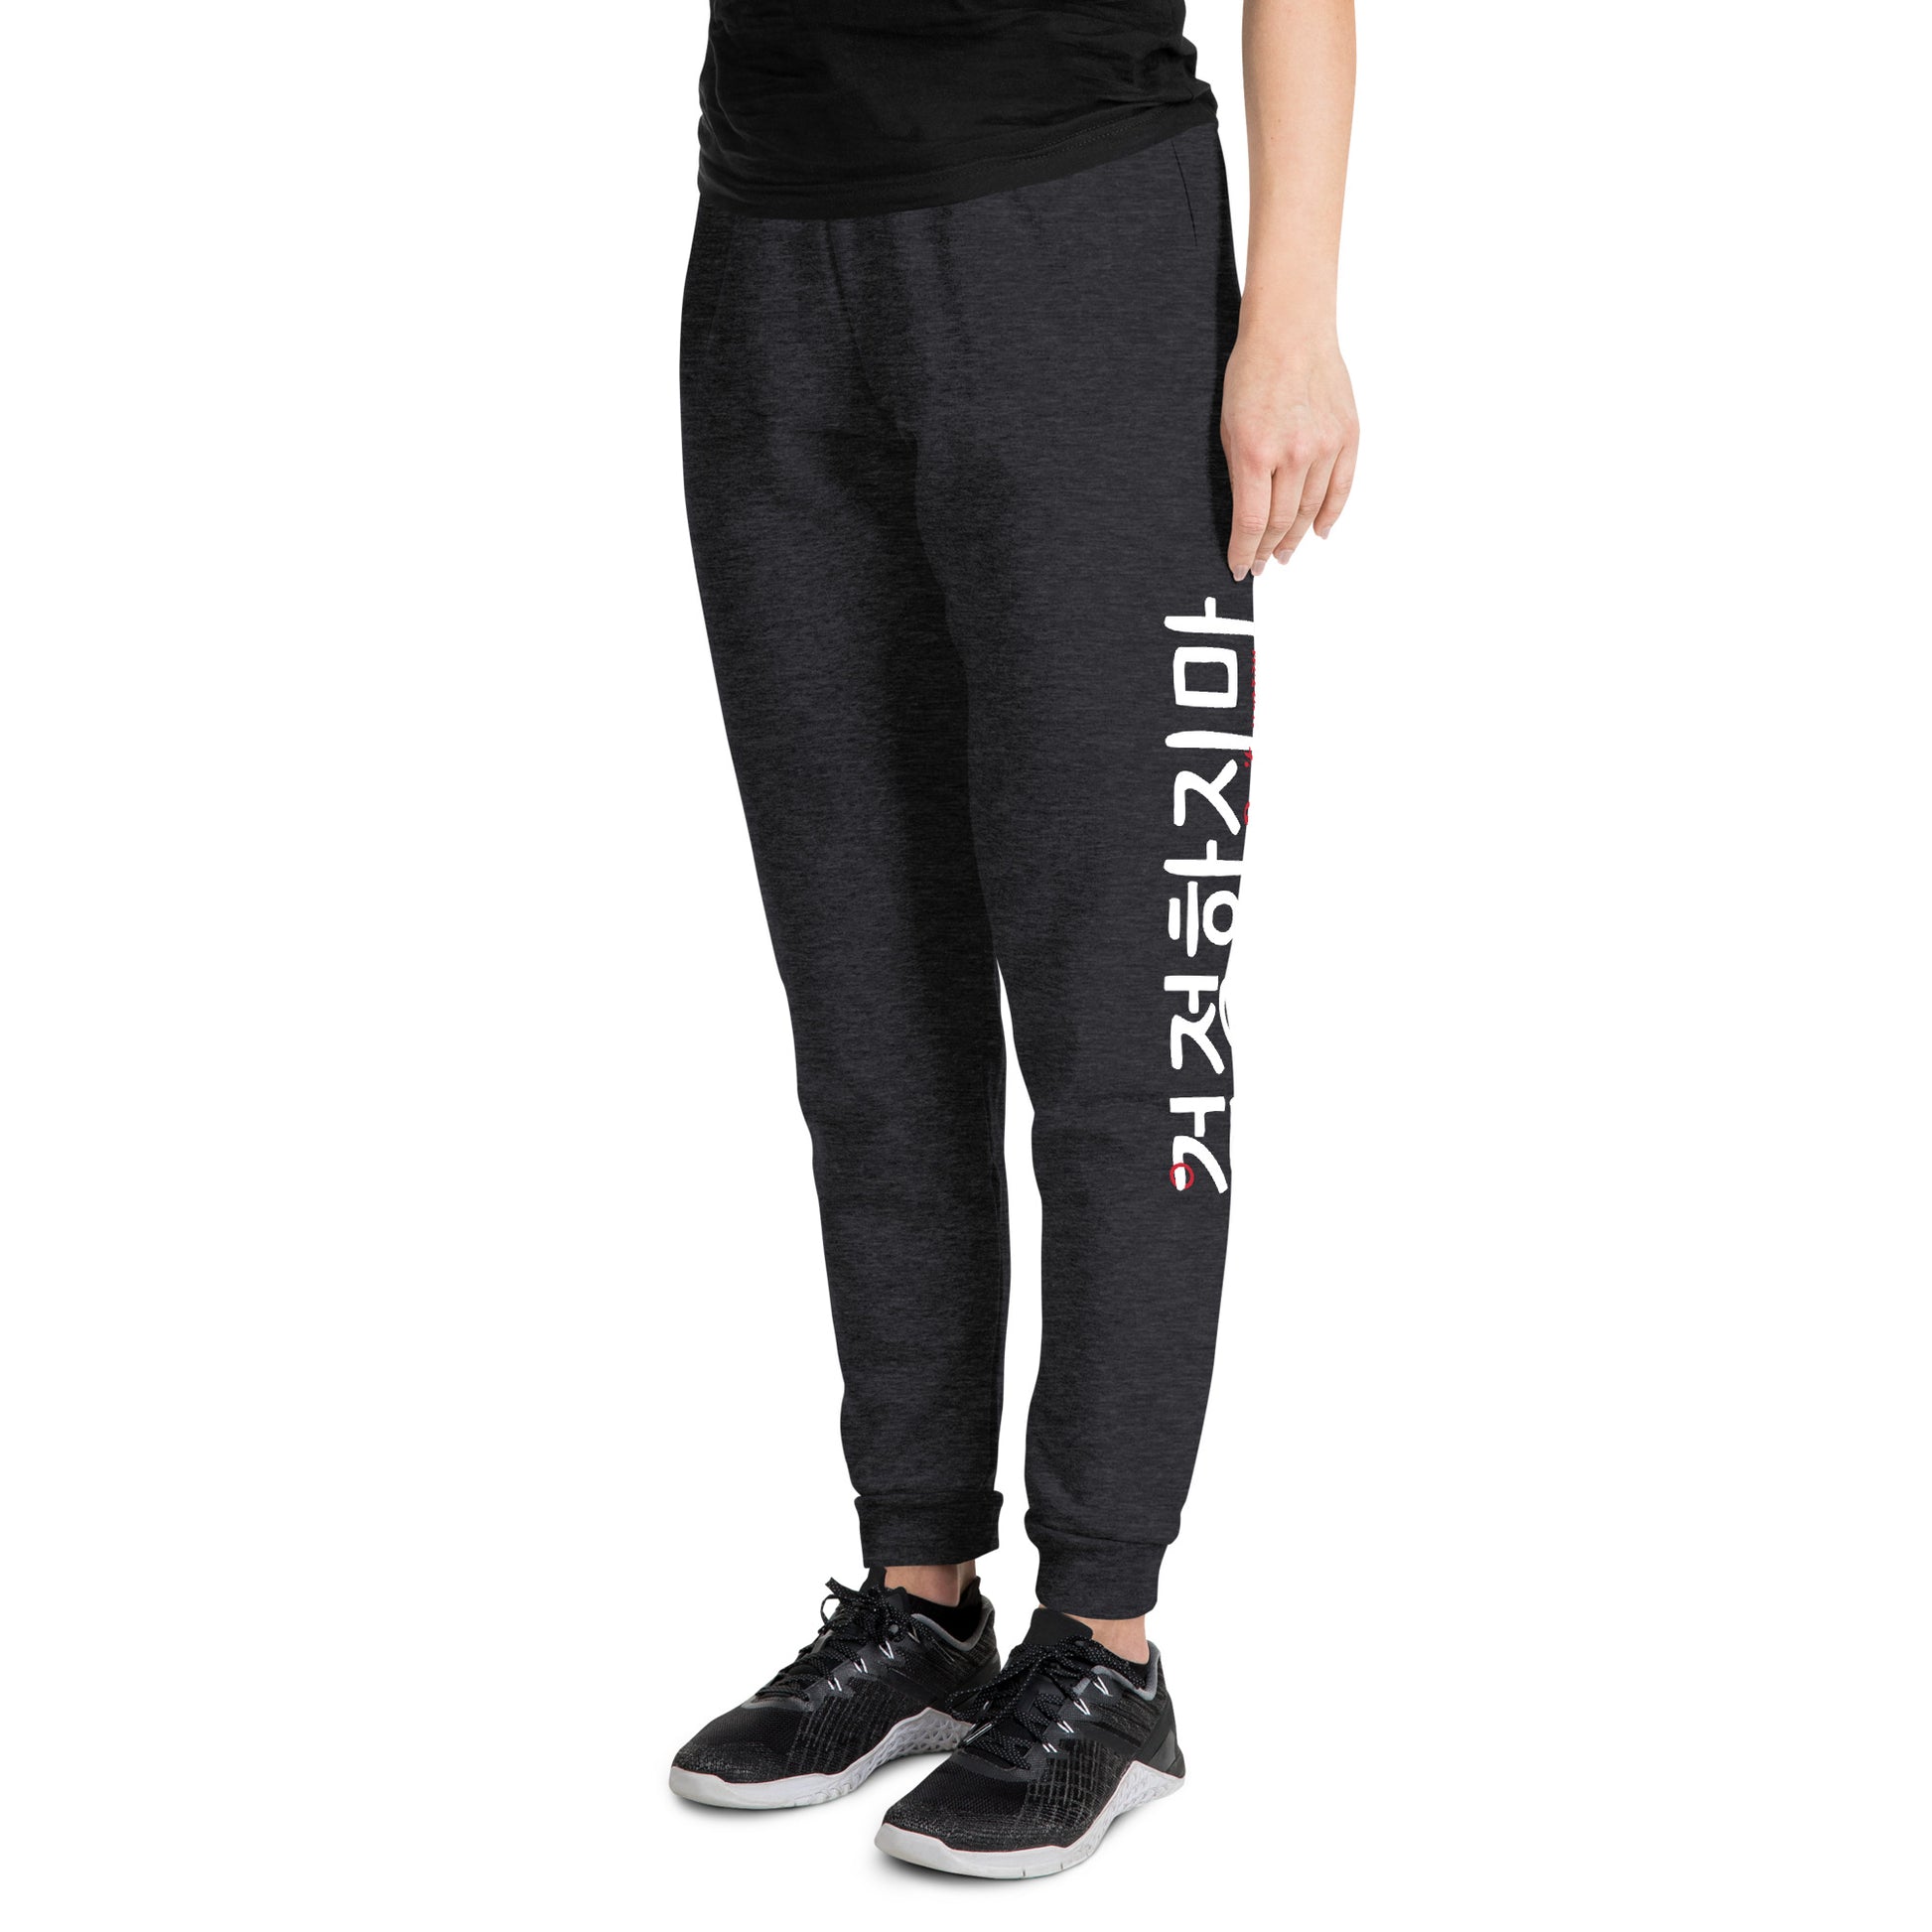 Black heather pair of joggers with large print on the left leg saying 'Don't worry' in English and Hangul